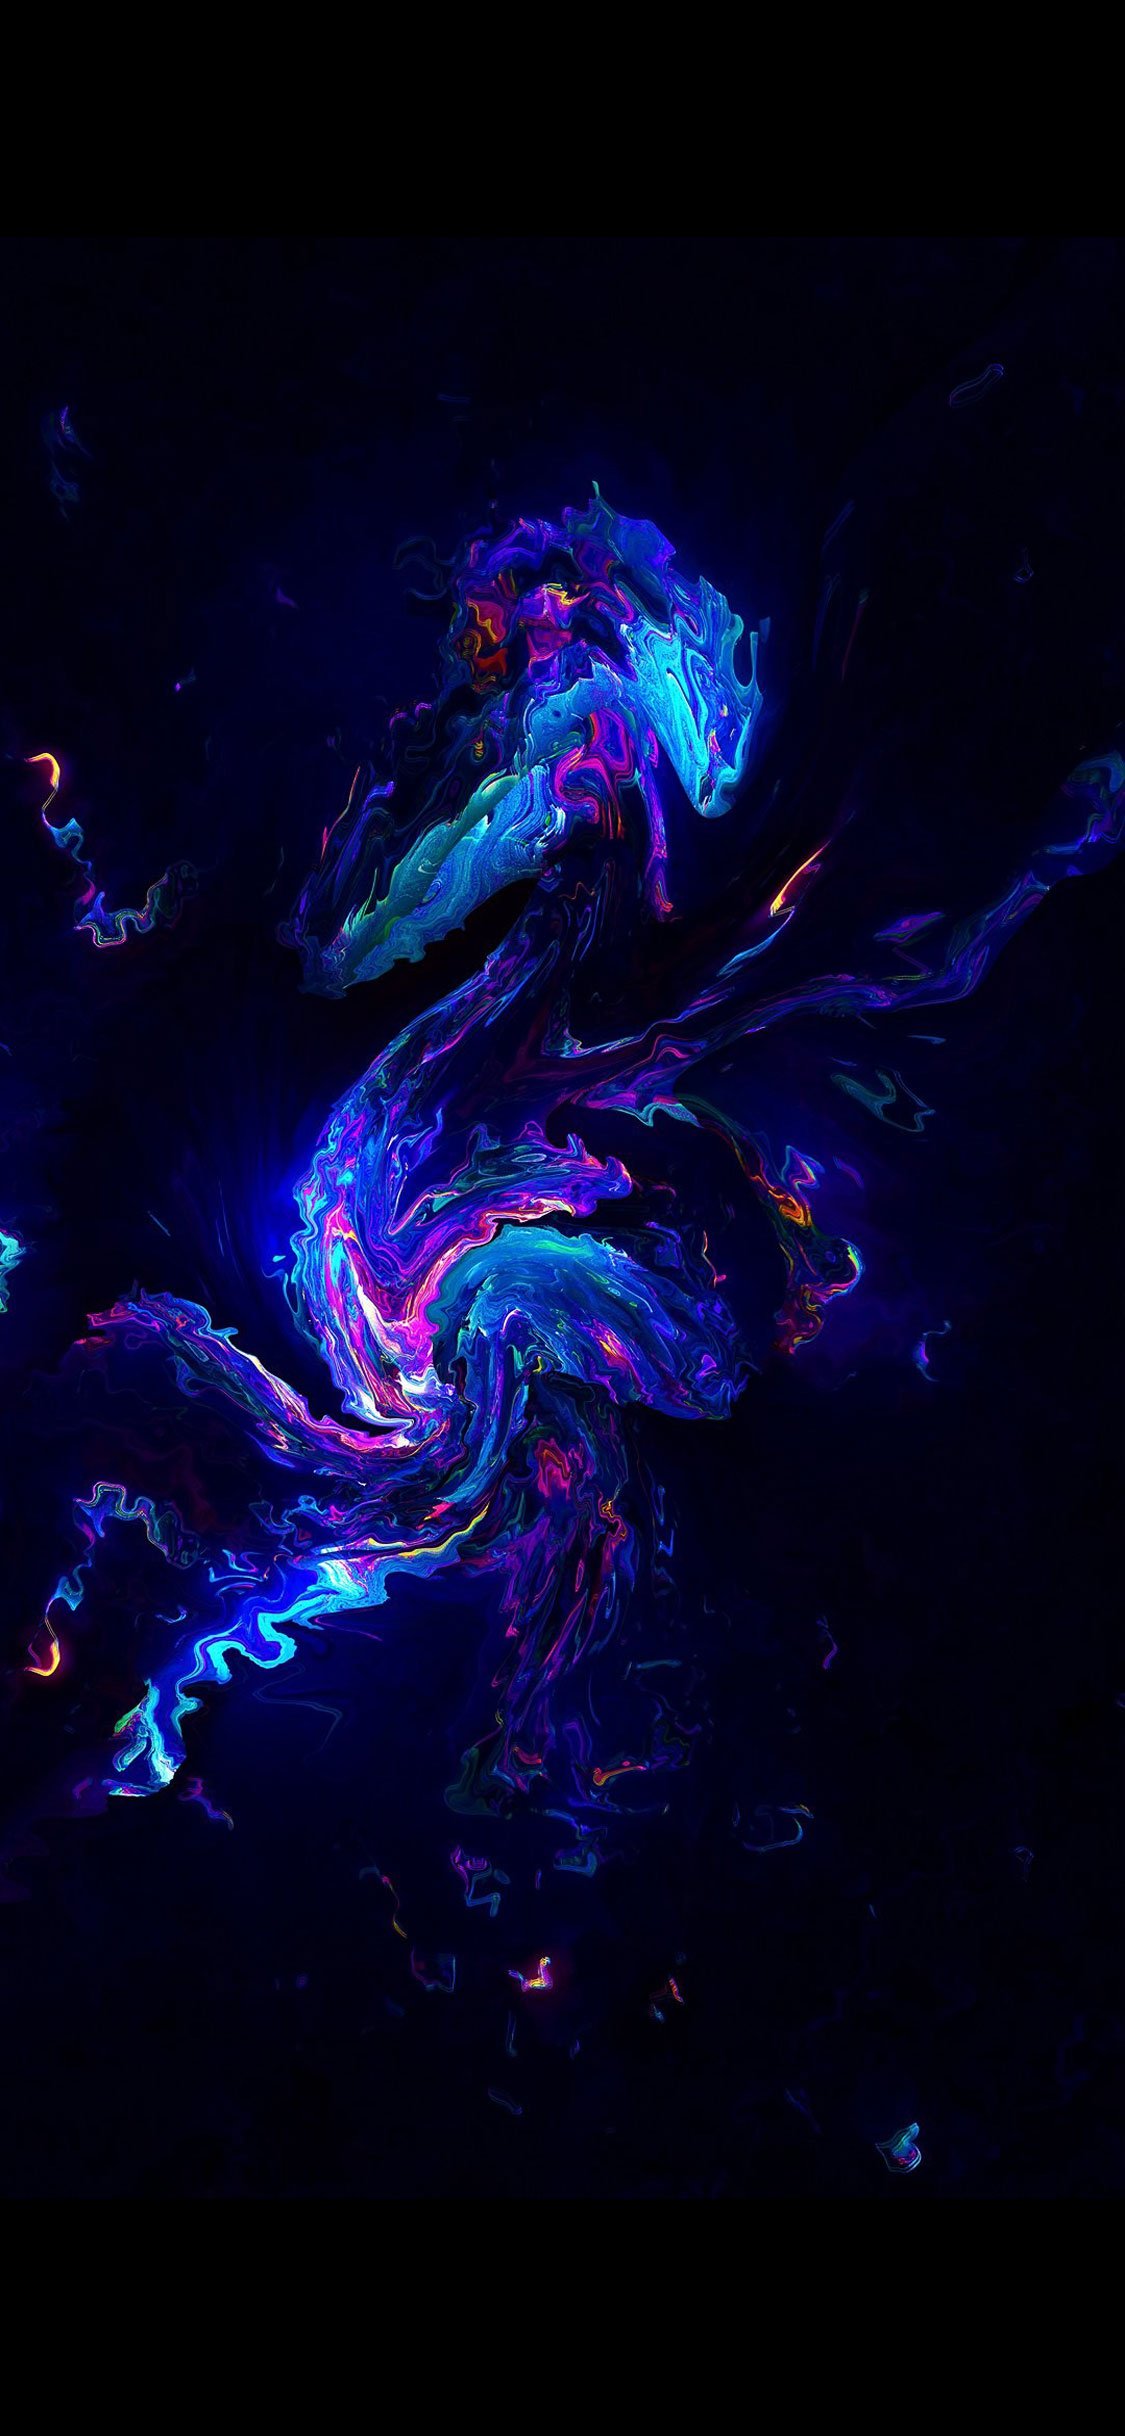 Cool Wallpapers Iphone X